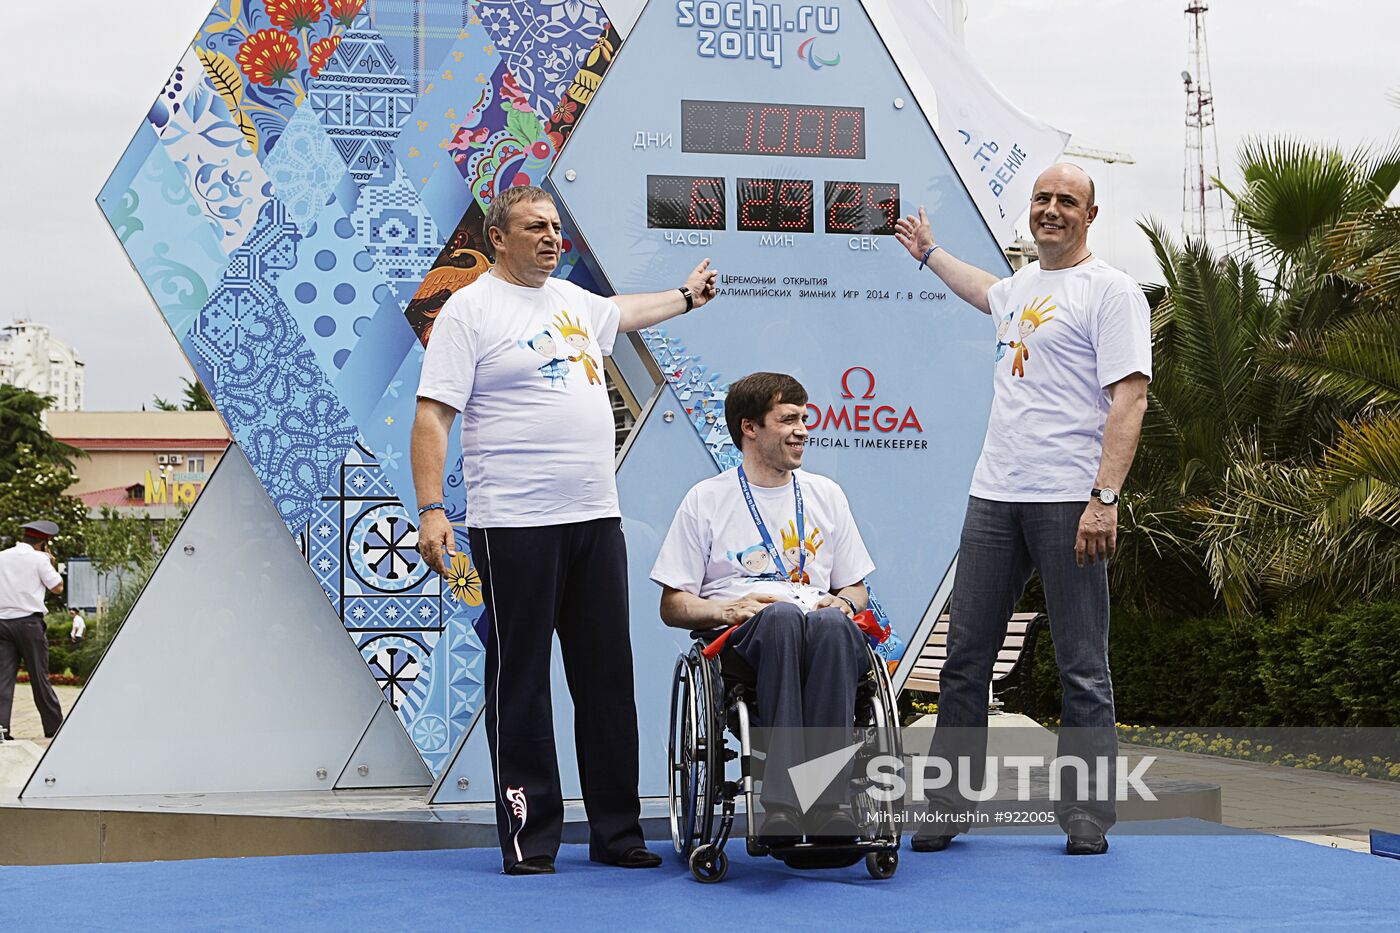 Campaign "1000 days to the Paralympic Games"